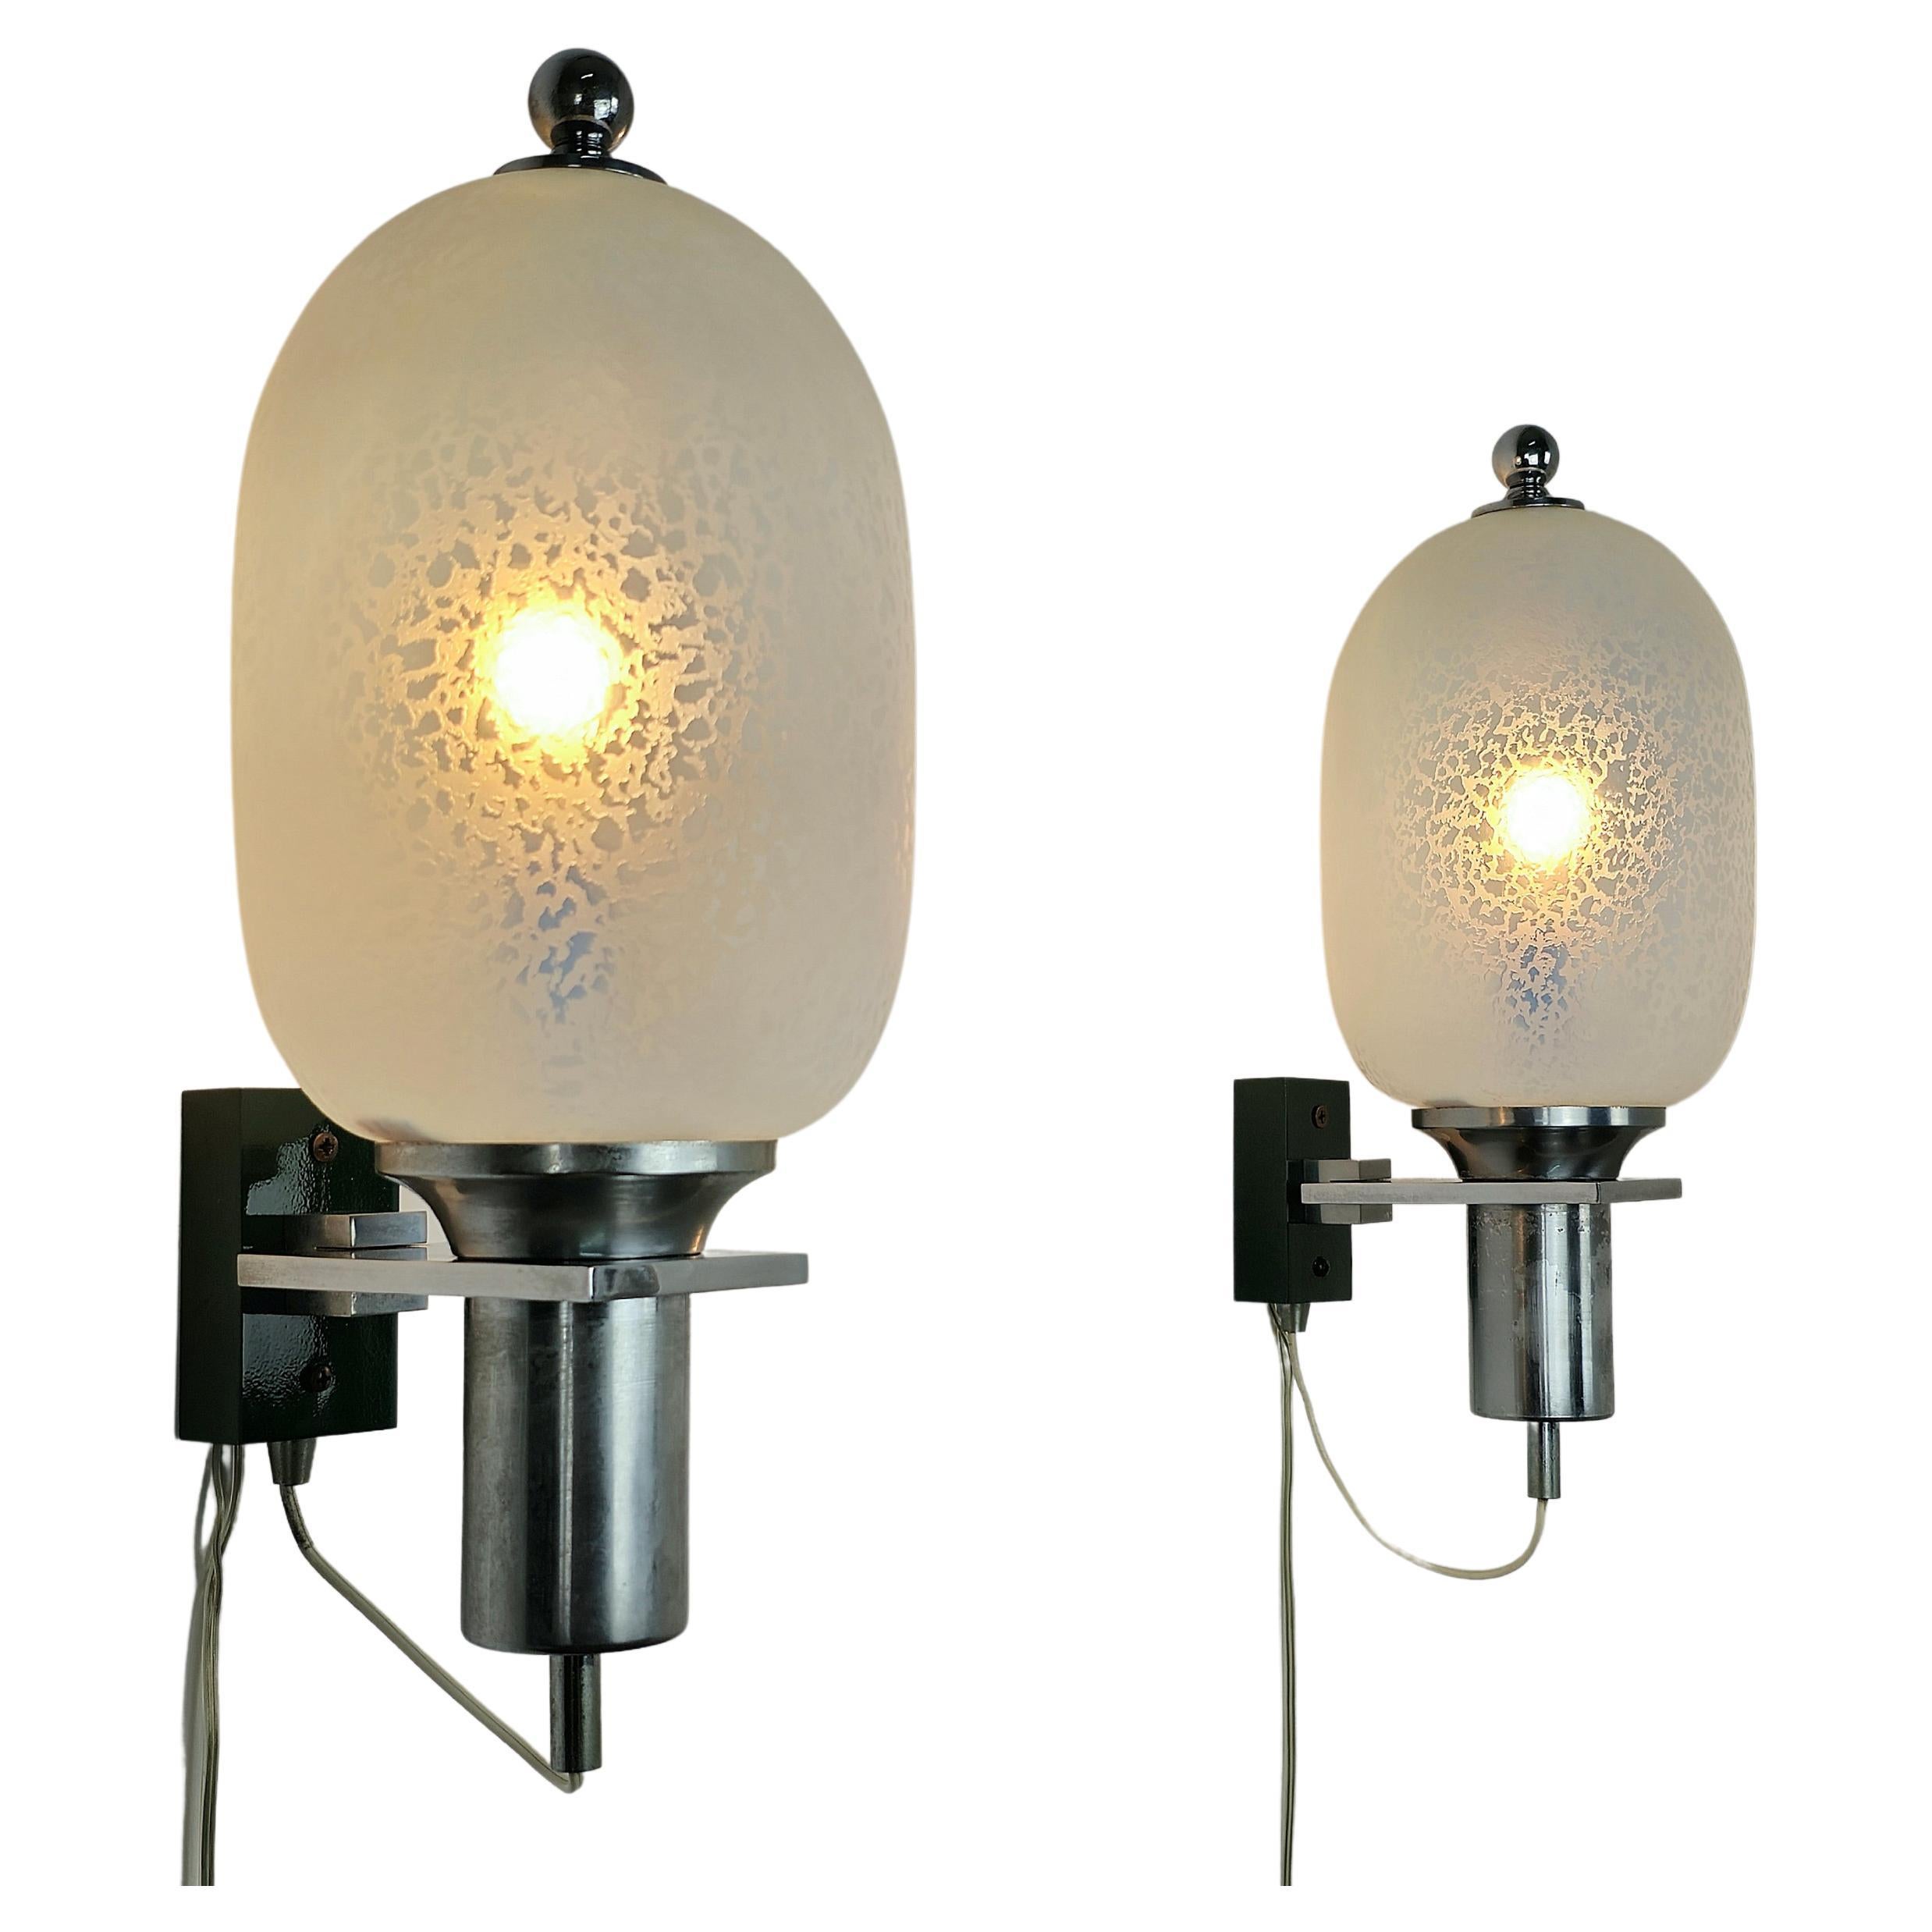 Set of 2 wall lamps made in Italy in the 70s.
Each individual wall lamp was made with a green enamelled brass wall plate and a chromed brass structure that supports a circular-shaped etched glass diffuser.
We recommend this pair of appliques